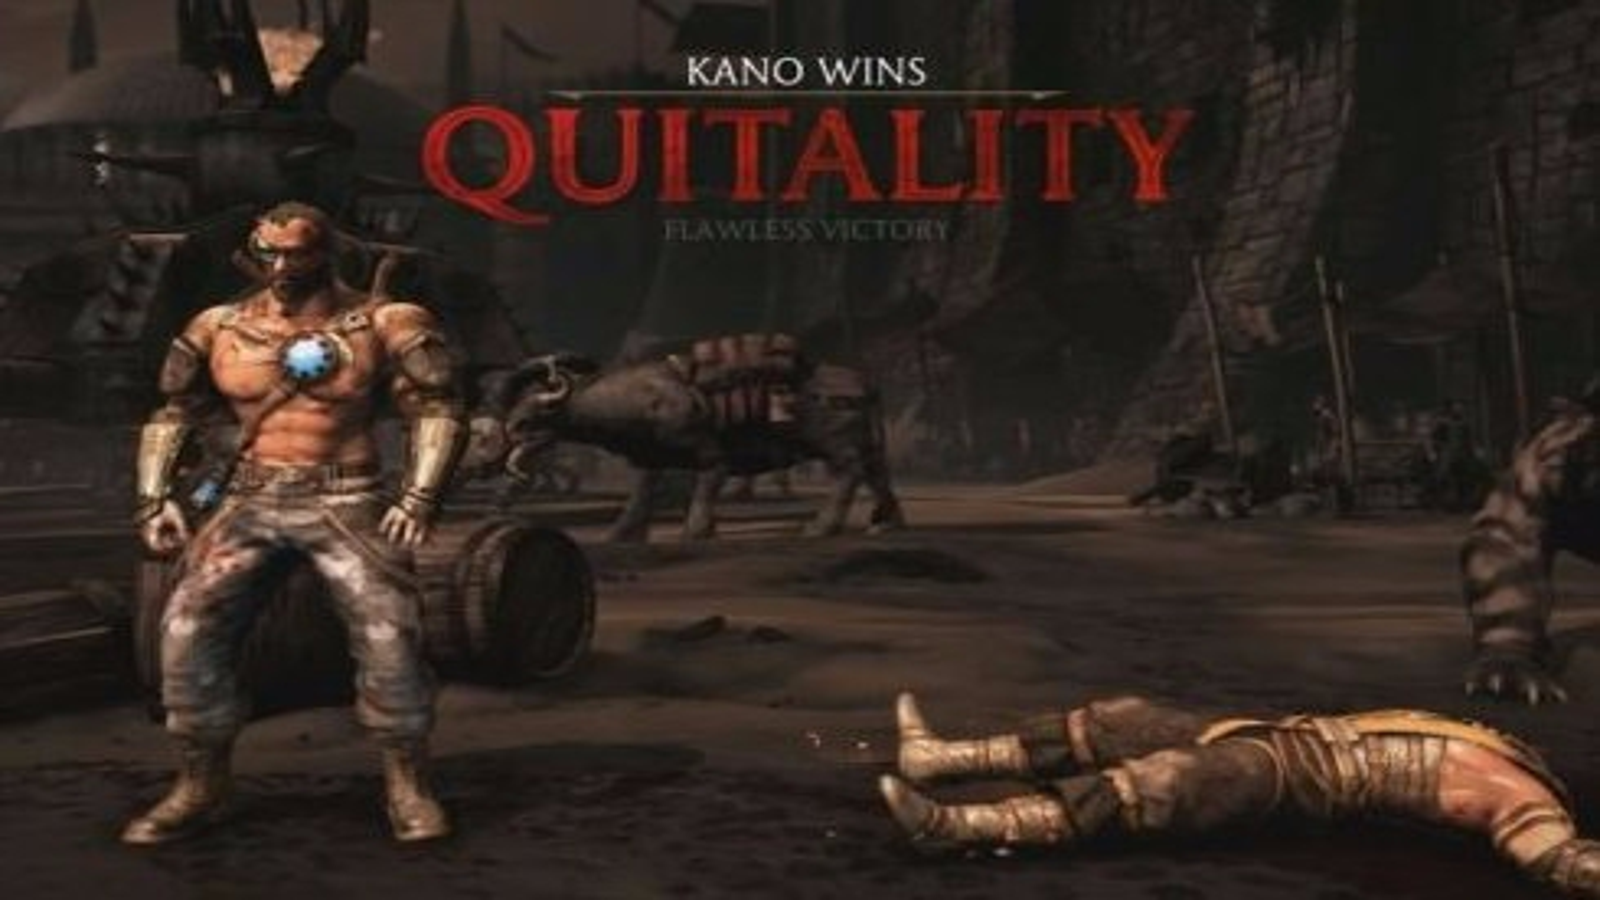 Here's what happens to your character if you rage quit in Mortal Kombat 1